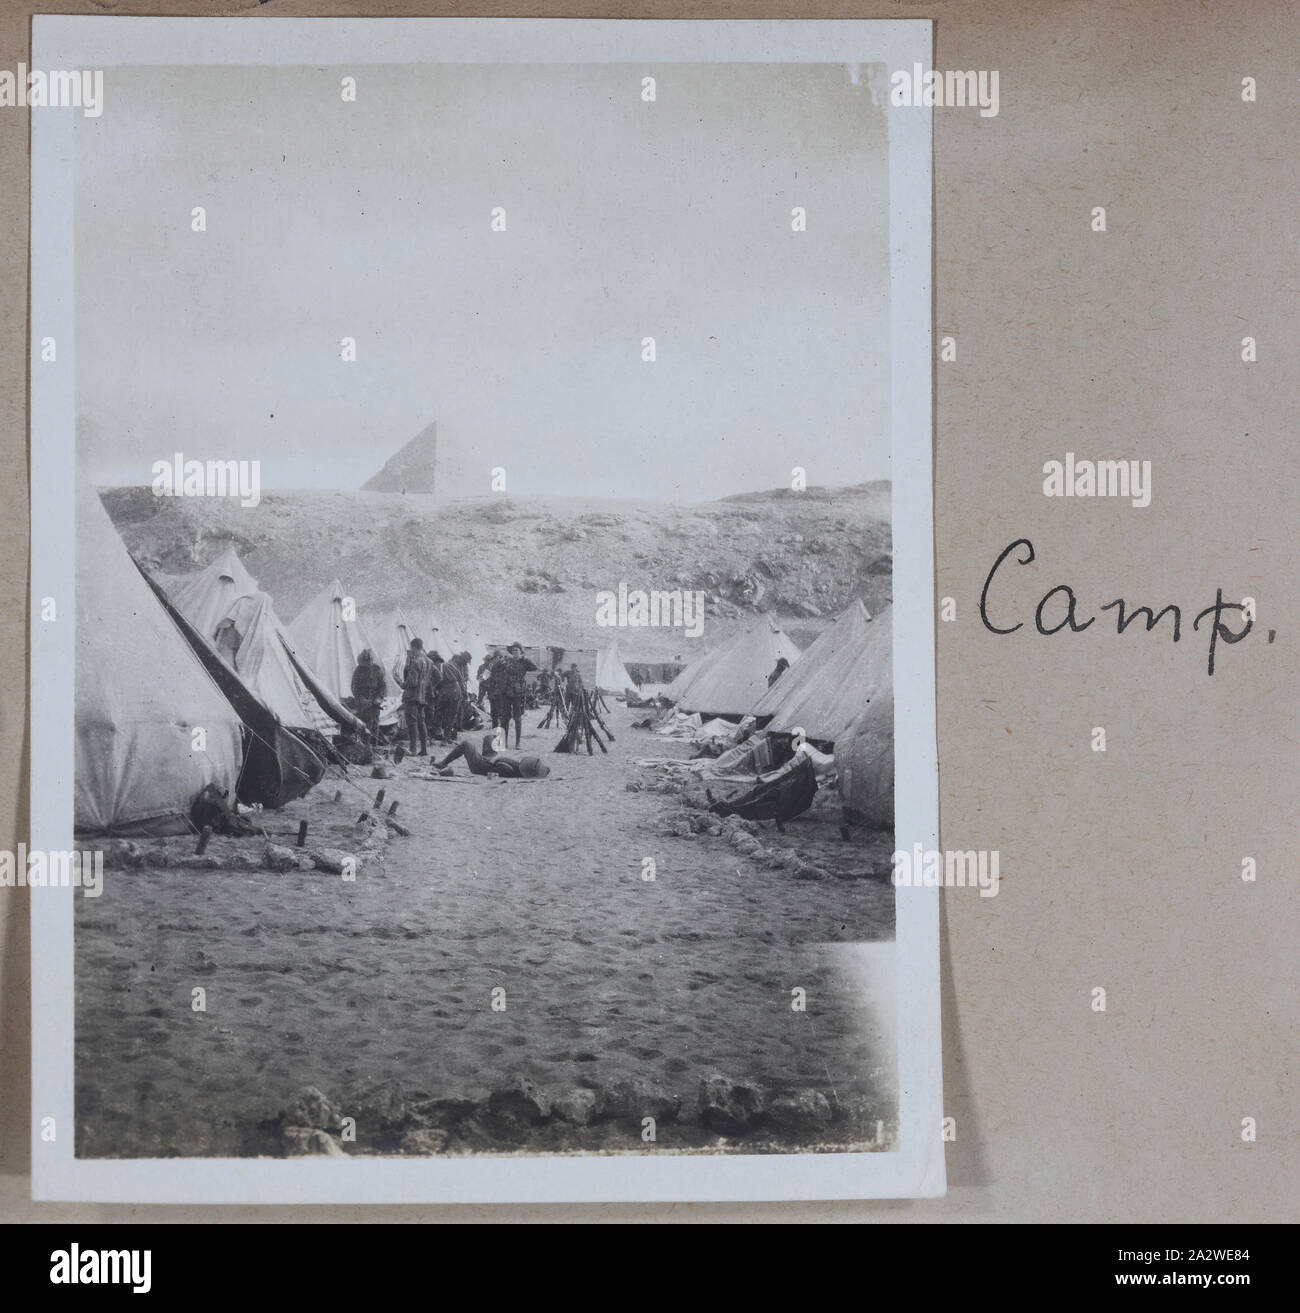 Photograph - 'Camp', Egypt, Captain Edward Albert McKenna, World War I, 1914-1915, One of 139 photographs in an album from World War I likely to have been taken by Captain Edward Albert McKenna. The photographs include the 7th Battalion training in Mena Camp, Egypt, and sight-seeing. Image depicting a line of tents at Mena Camp, Egypt. Mena Camp was one of three training camps in Egypt used by the A.I.F. and the N.Z.E.F Stock Photo